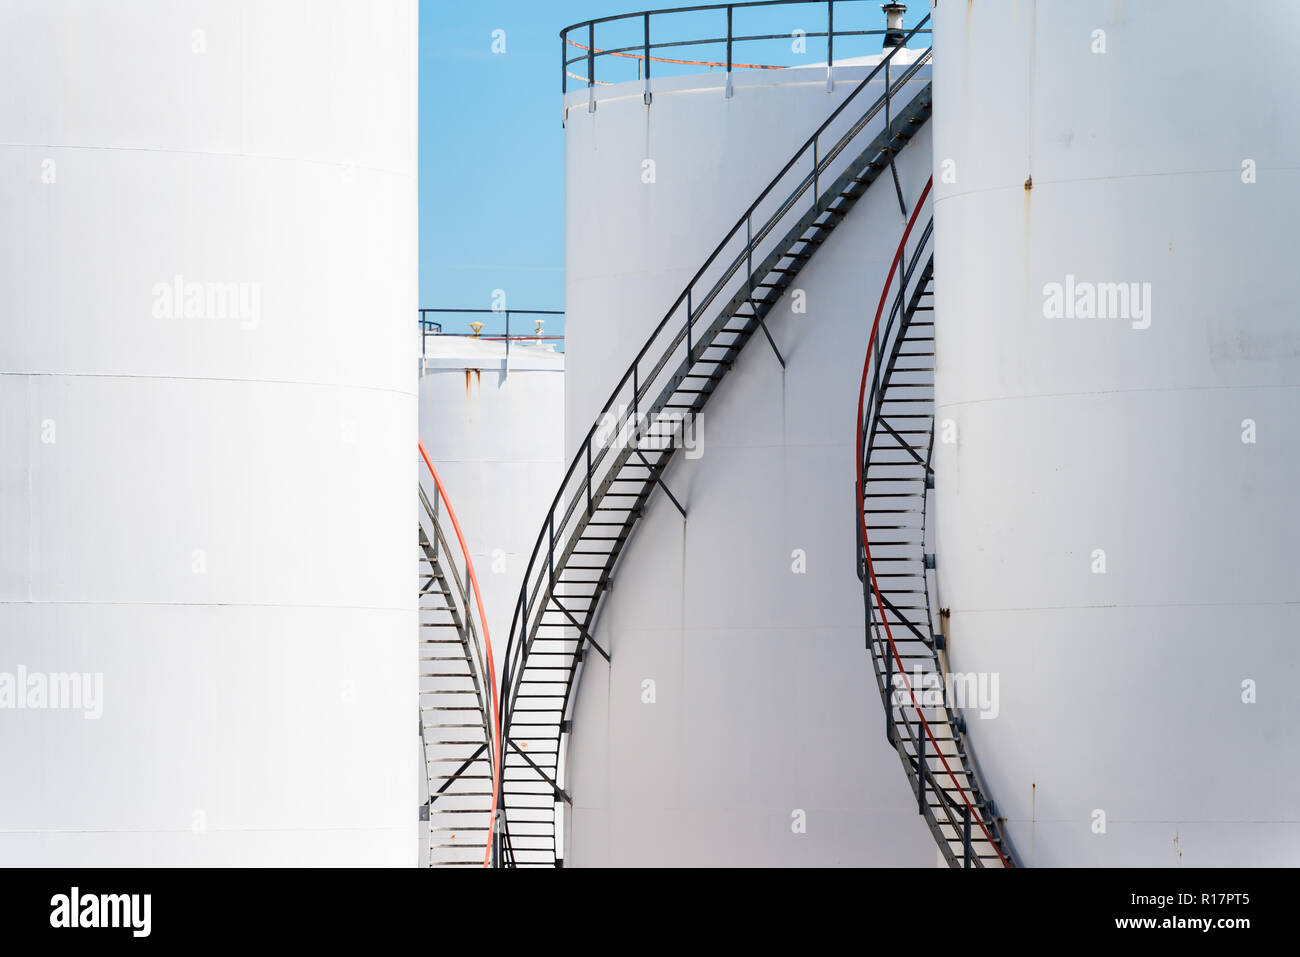 Oil storage tanks at a petrochemical plant. Stock Photo